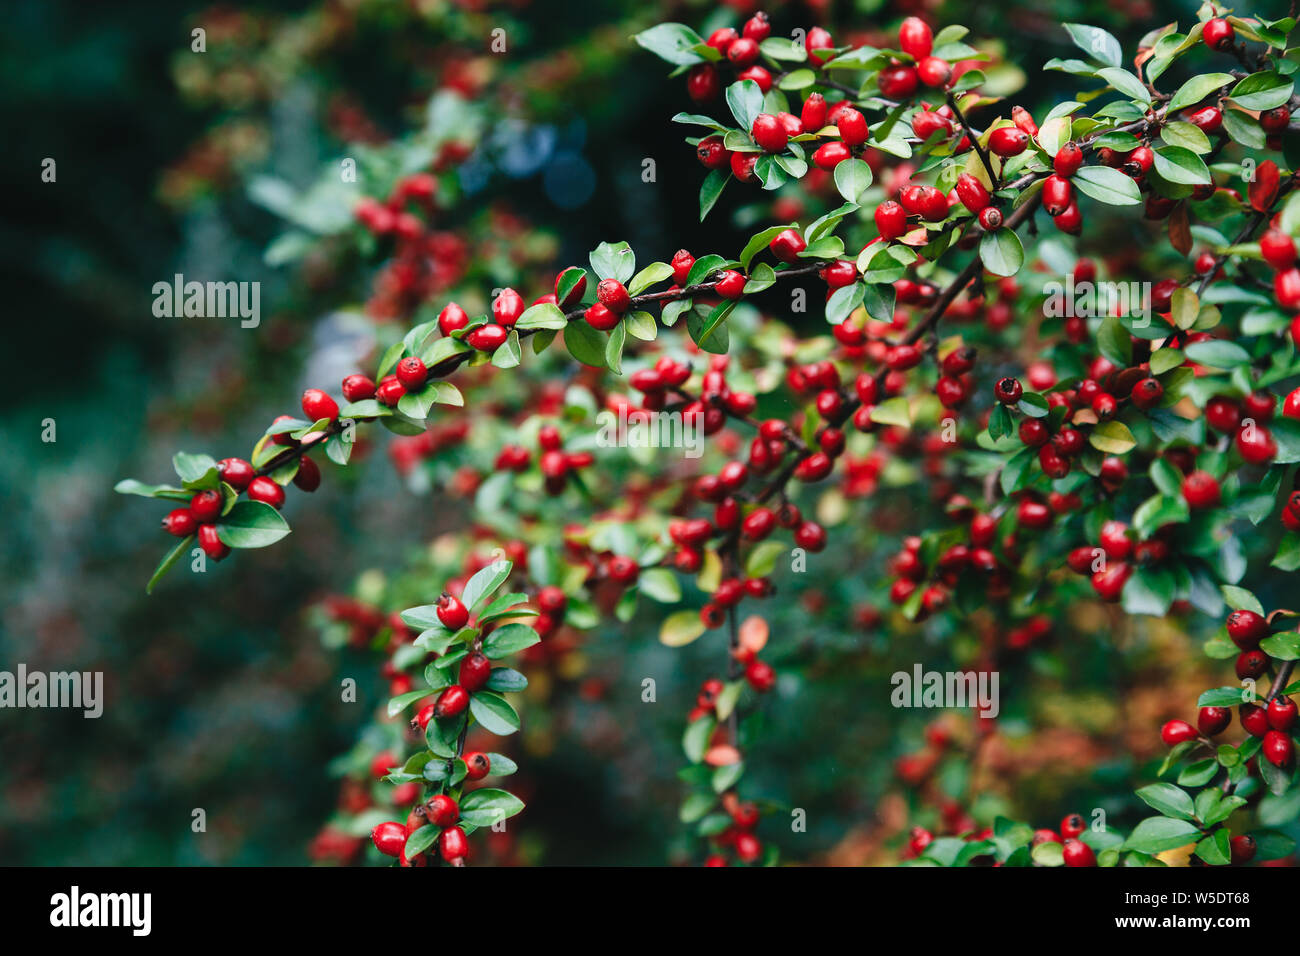 Cotoneaster bush with small red berries and glossy green leaves Stock Photo